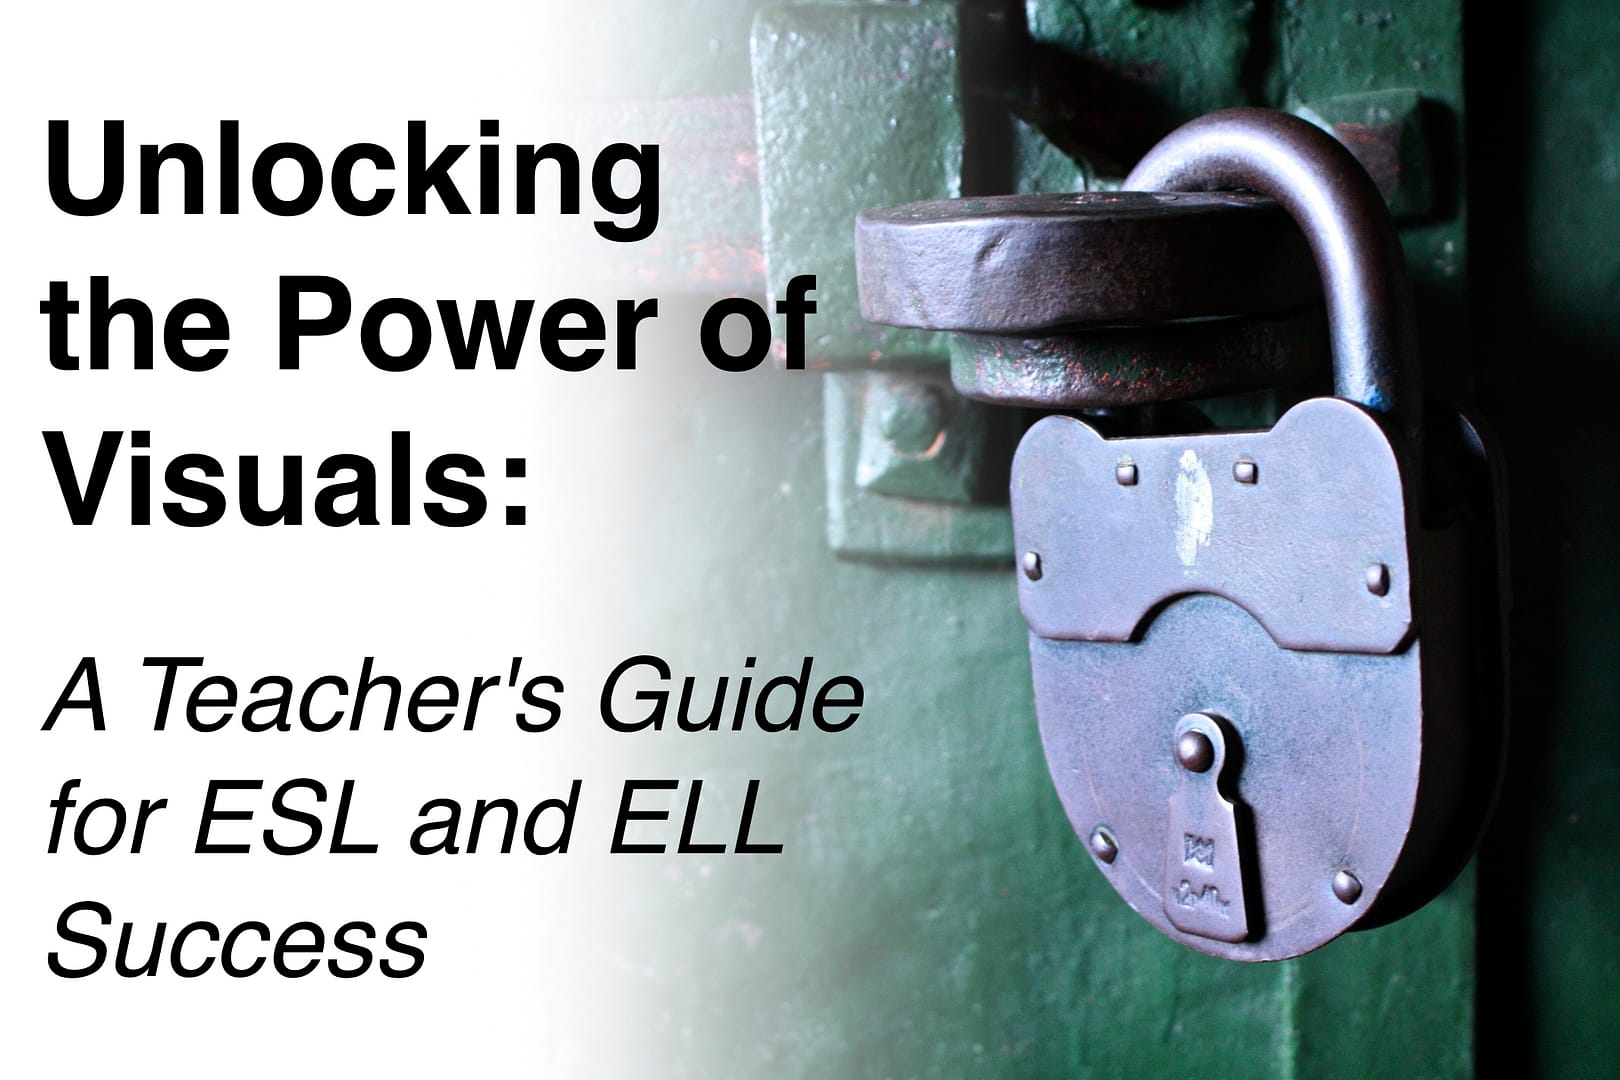 Unlocking the Power of Visuals: A Teacher’s Guide for ESL and ELL Success”